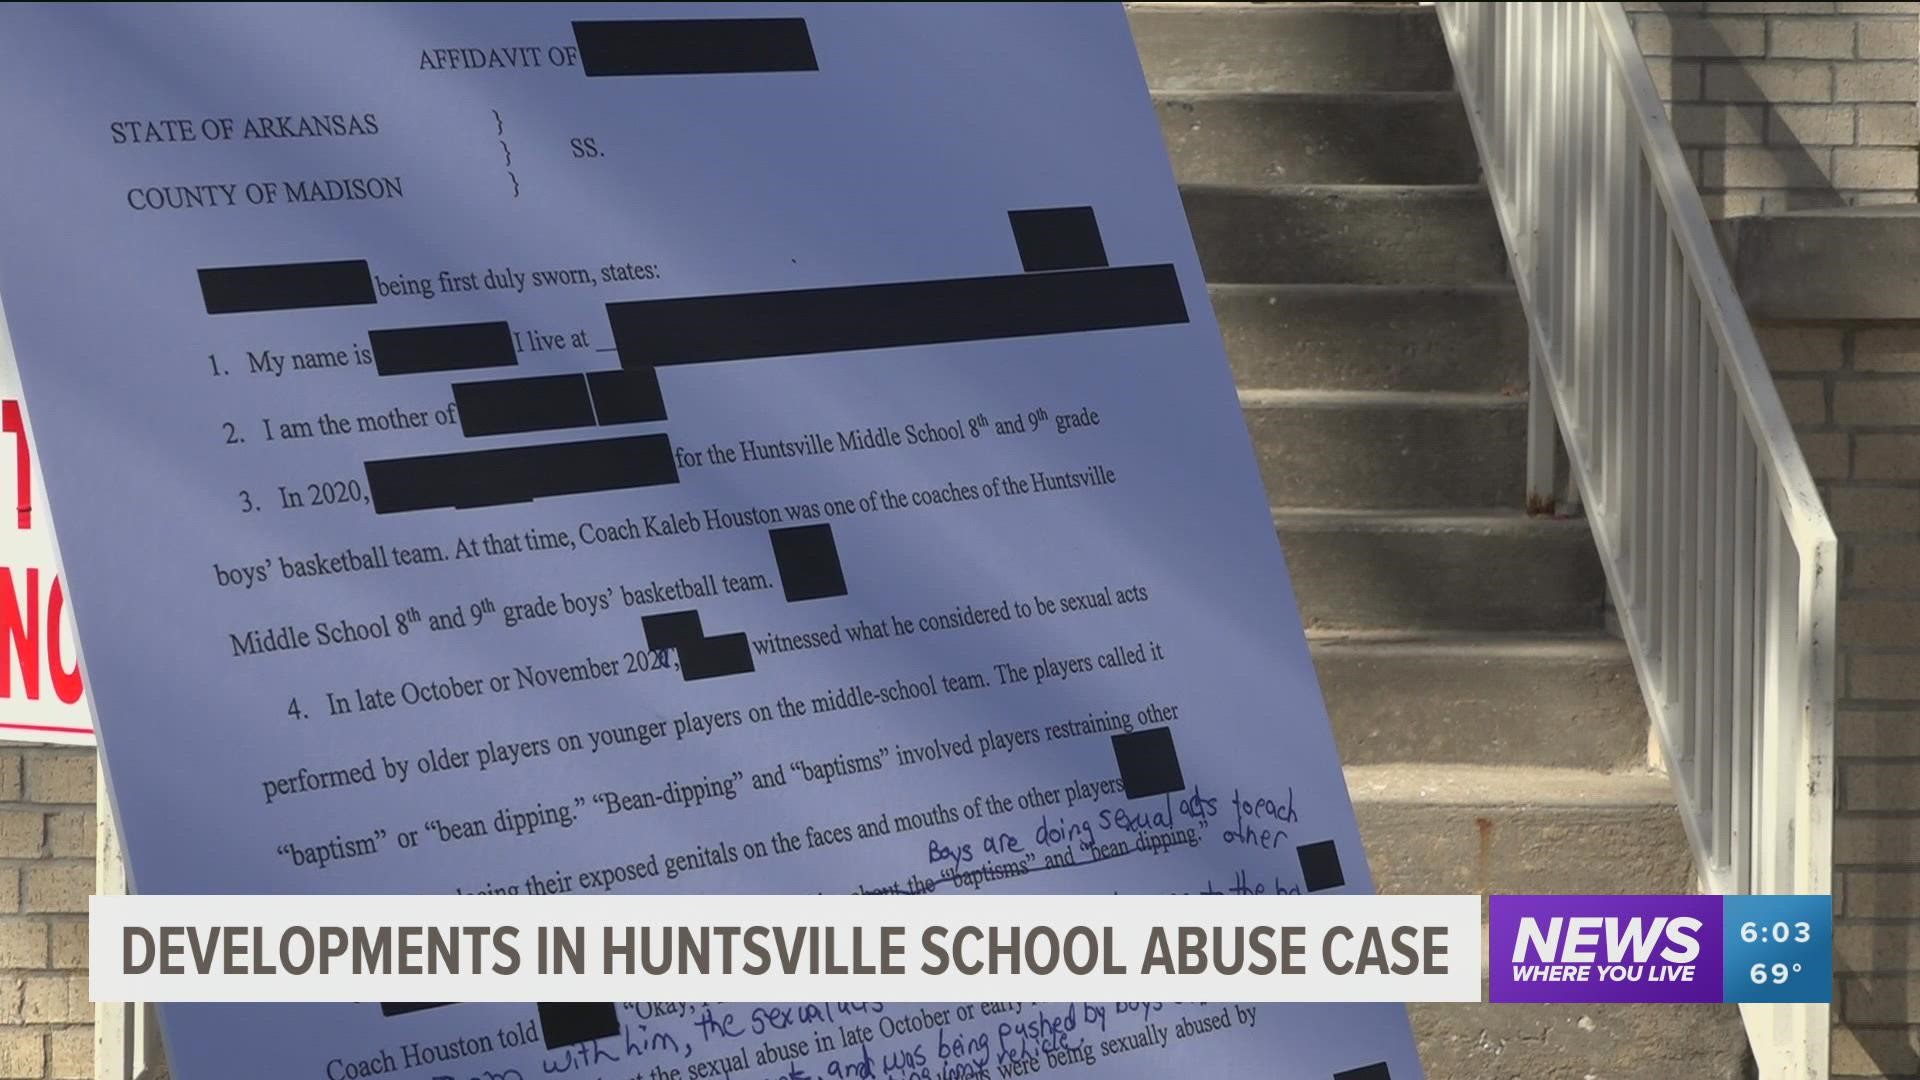 An attorney representing two Huntsville parents filed an amended criminal complaint against the district.